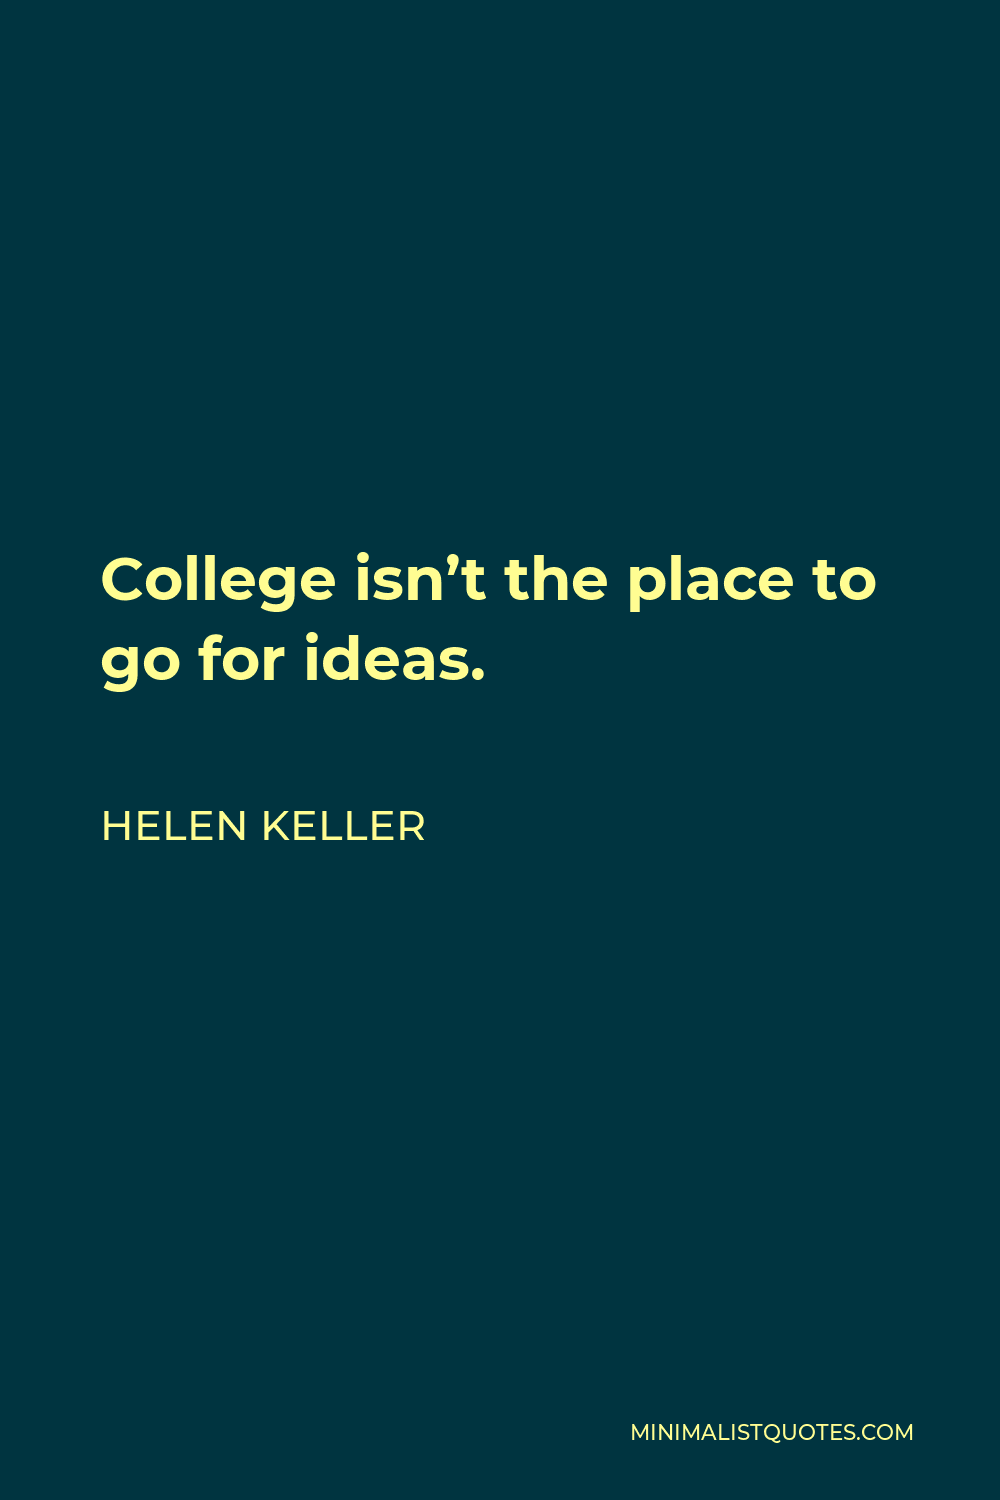 Helen Keller Quote: College isn't the place to go for ideas.